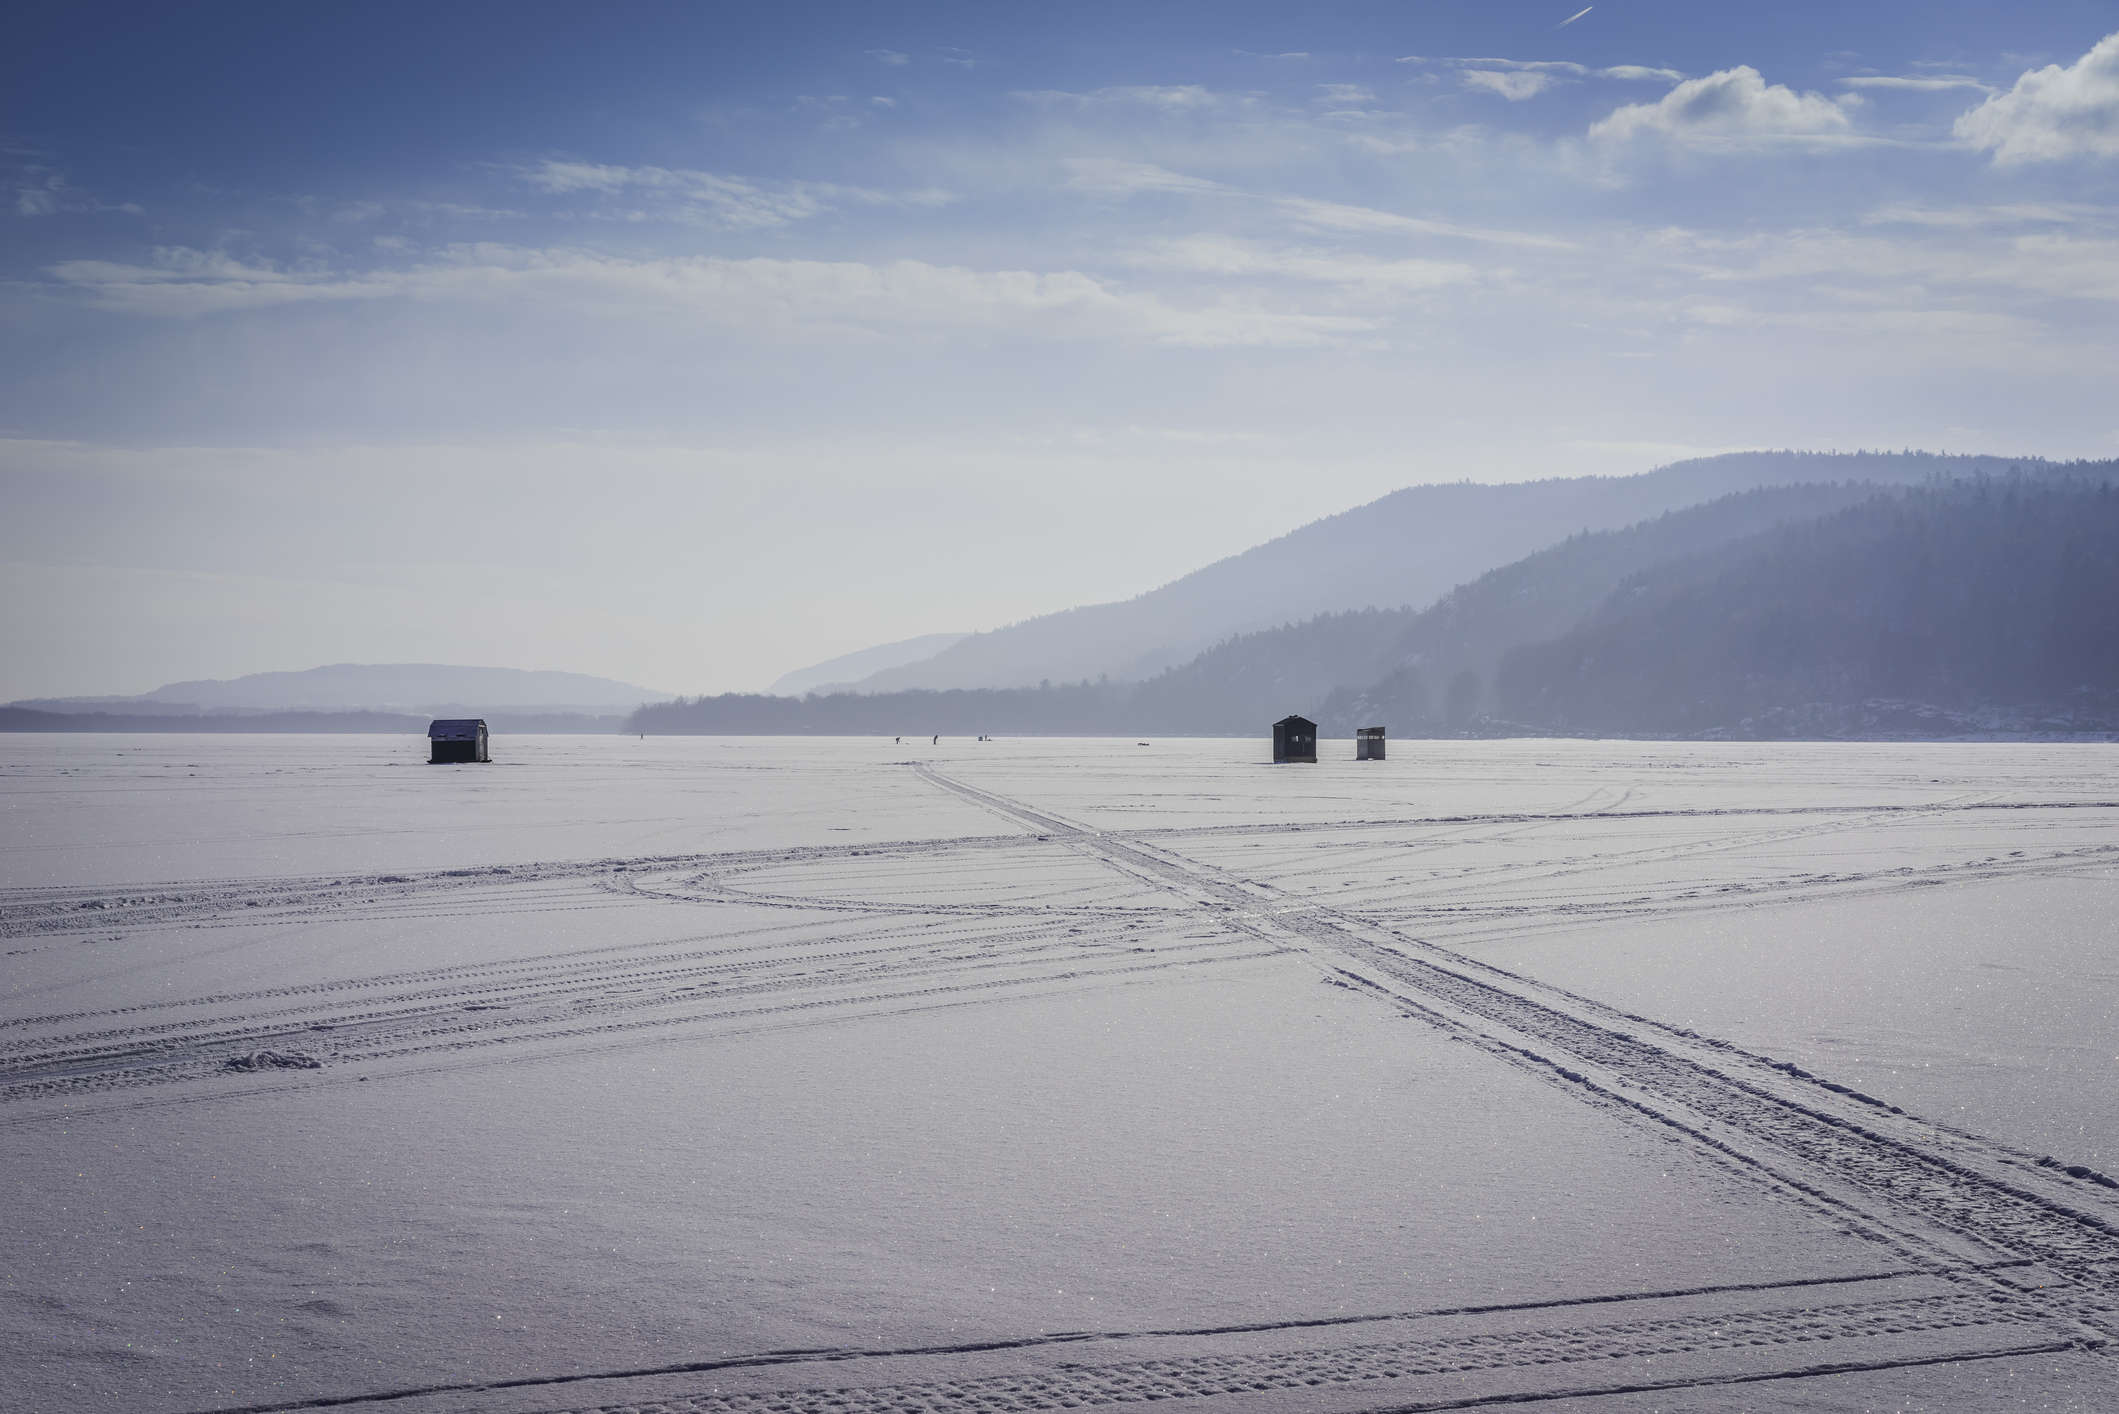 Ice fishing shanties sit in the distance on a frozen lake.